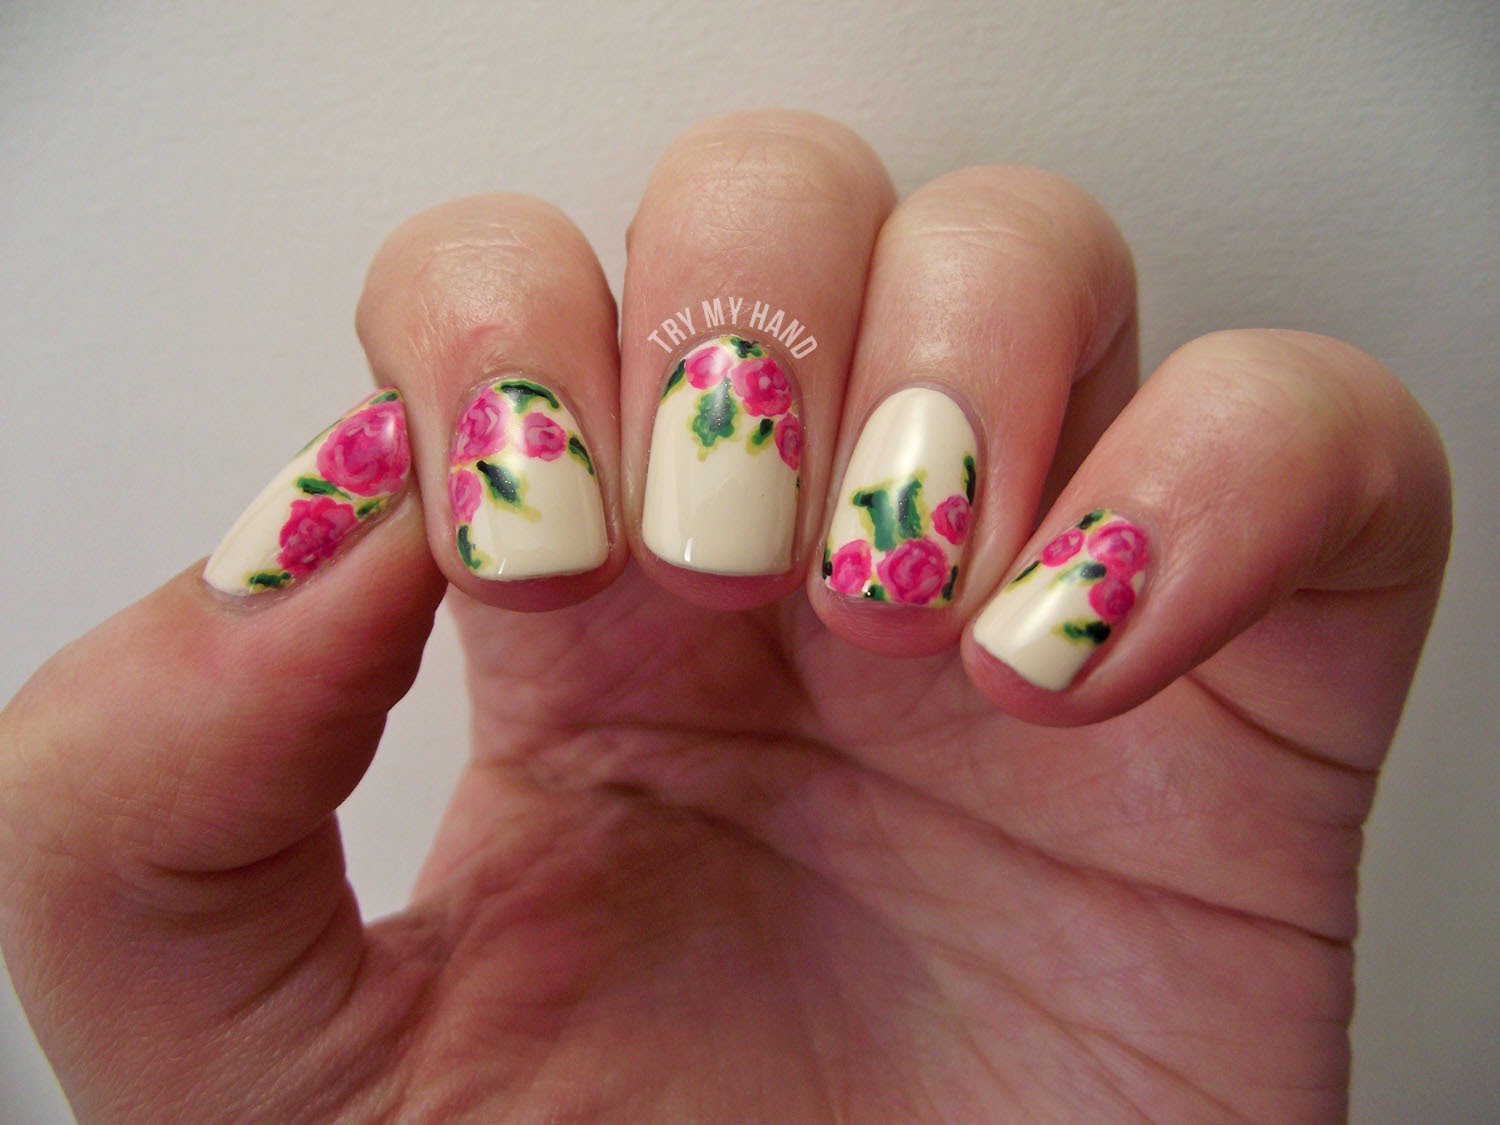 Fluorescent Pink and Floral Nail Art Tutorials - wide 4